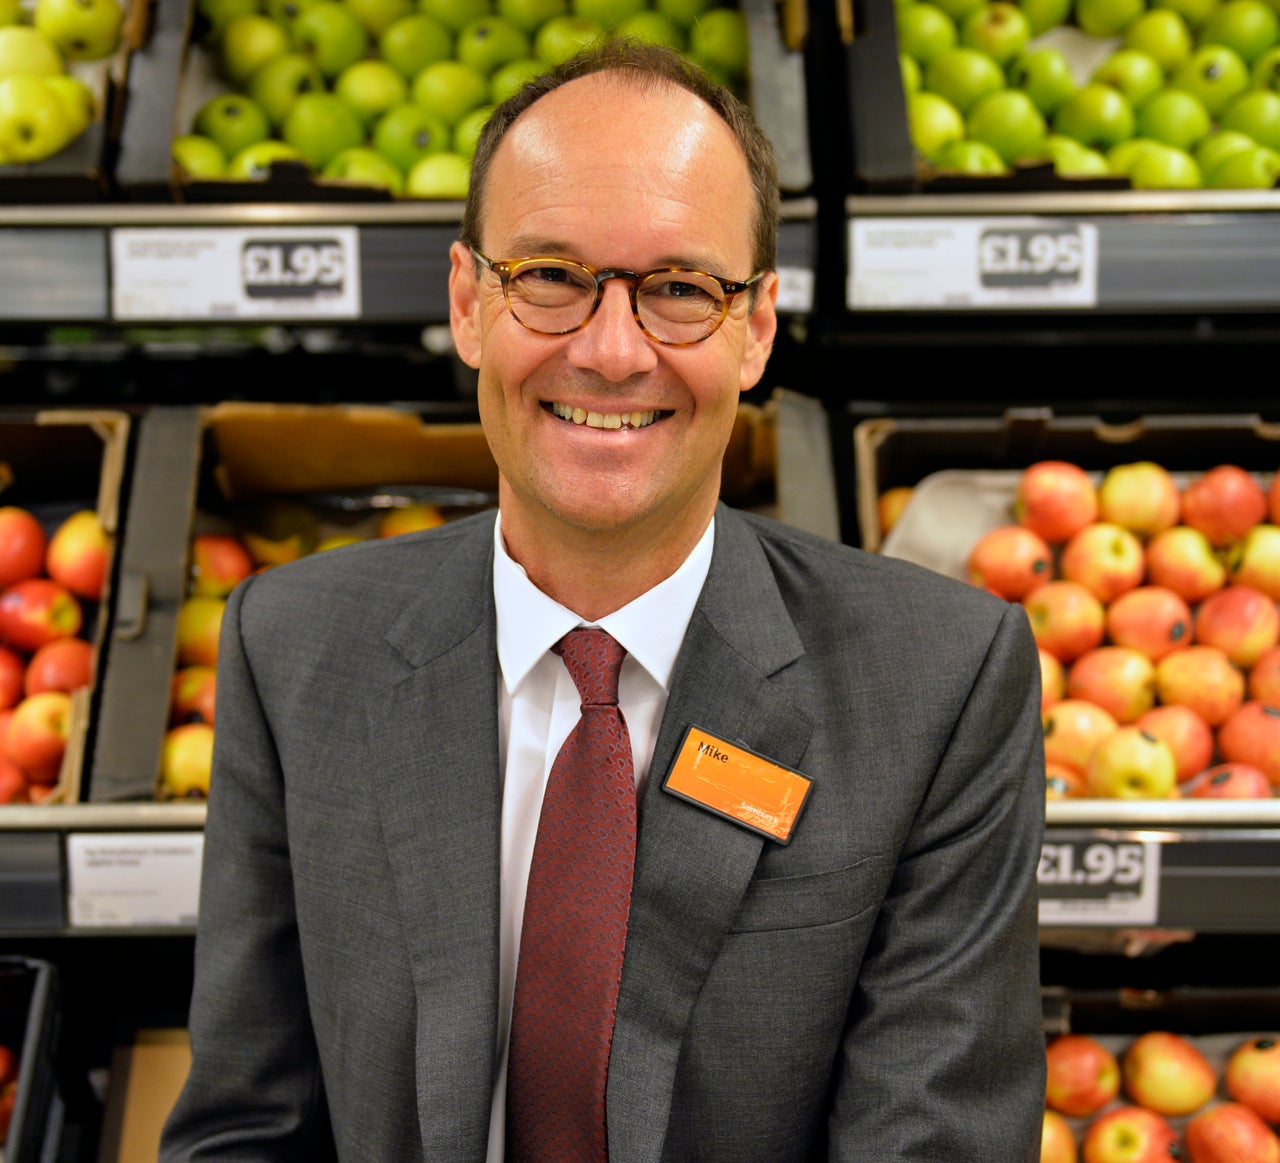 Mike Coupe, the former boss of Sainsbury’s, will now lead New Look as its chairman (Sainsburys / PA)